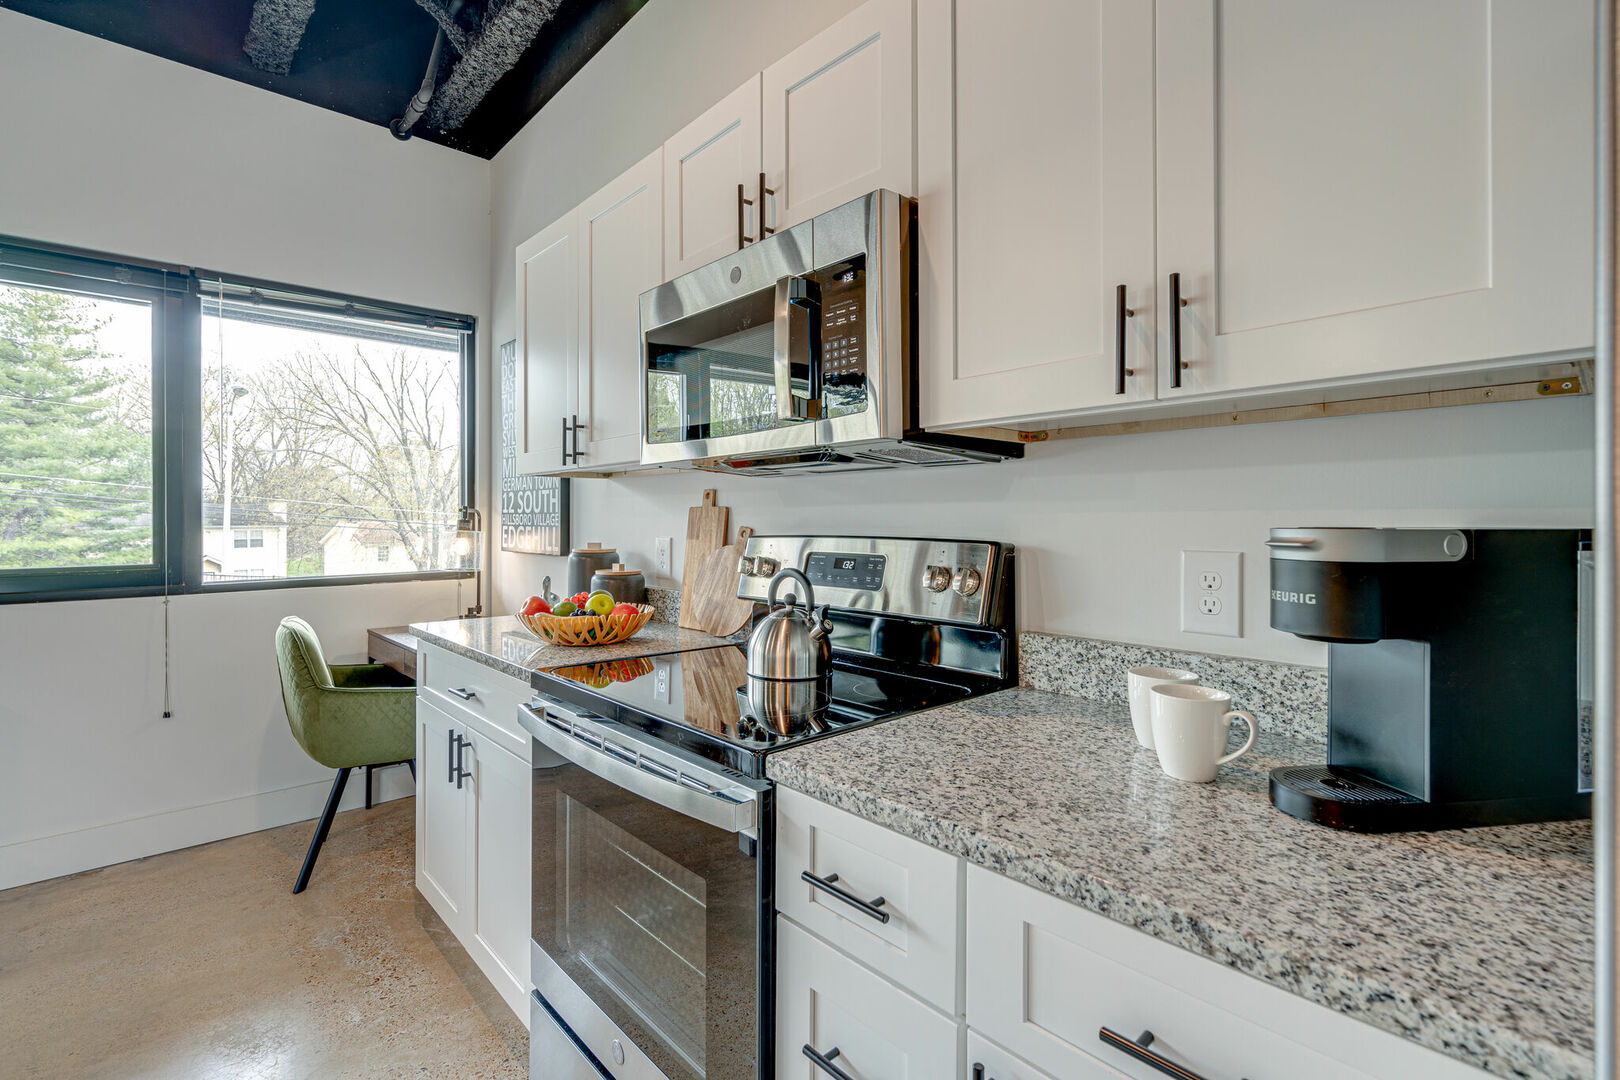 Fully equipped kitchen featuring stocked with basic cooking essentials and stainless steel appliances.